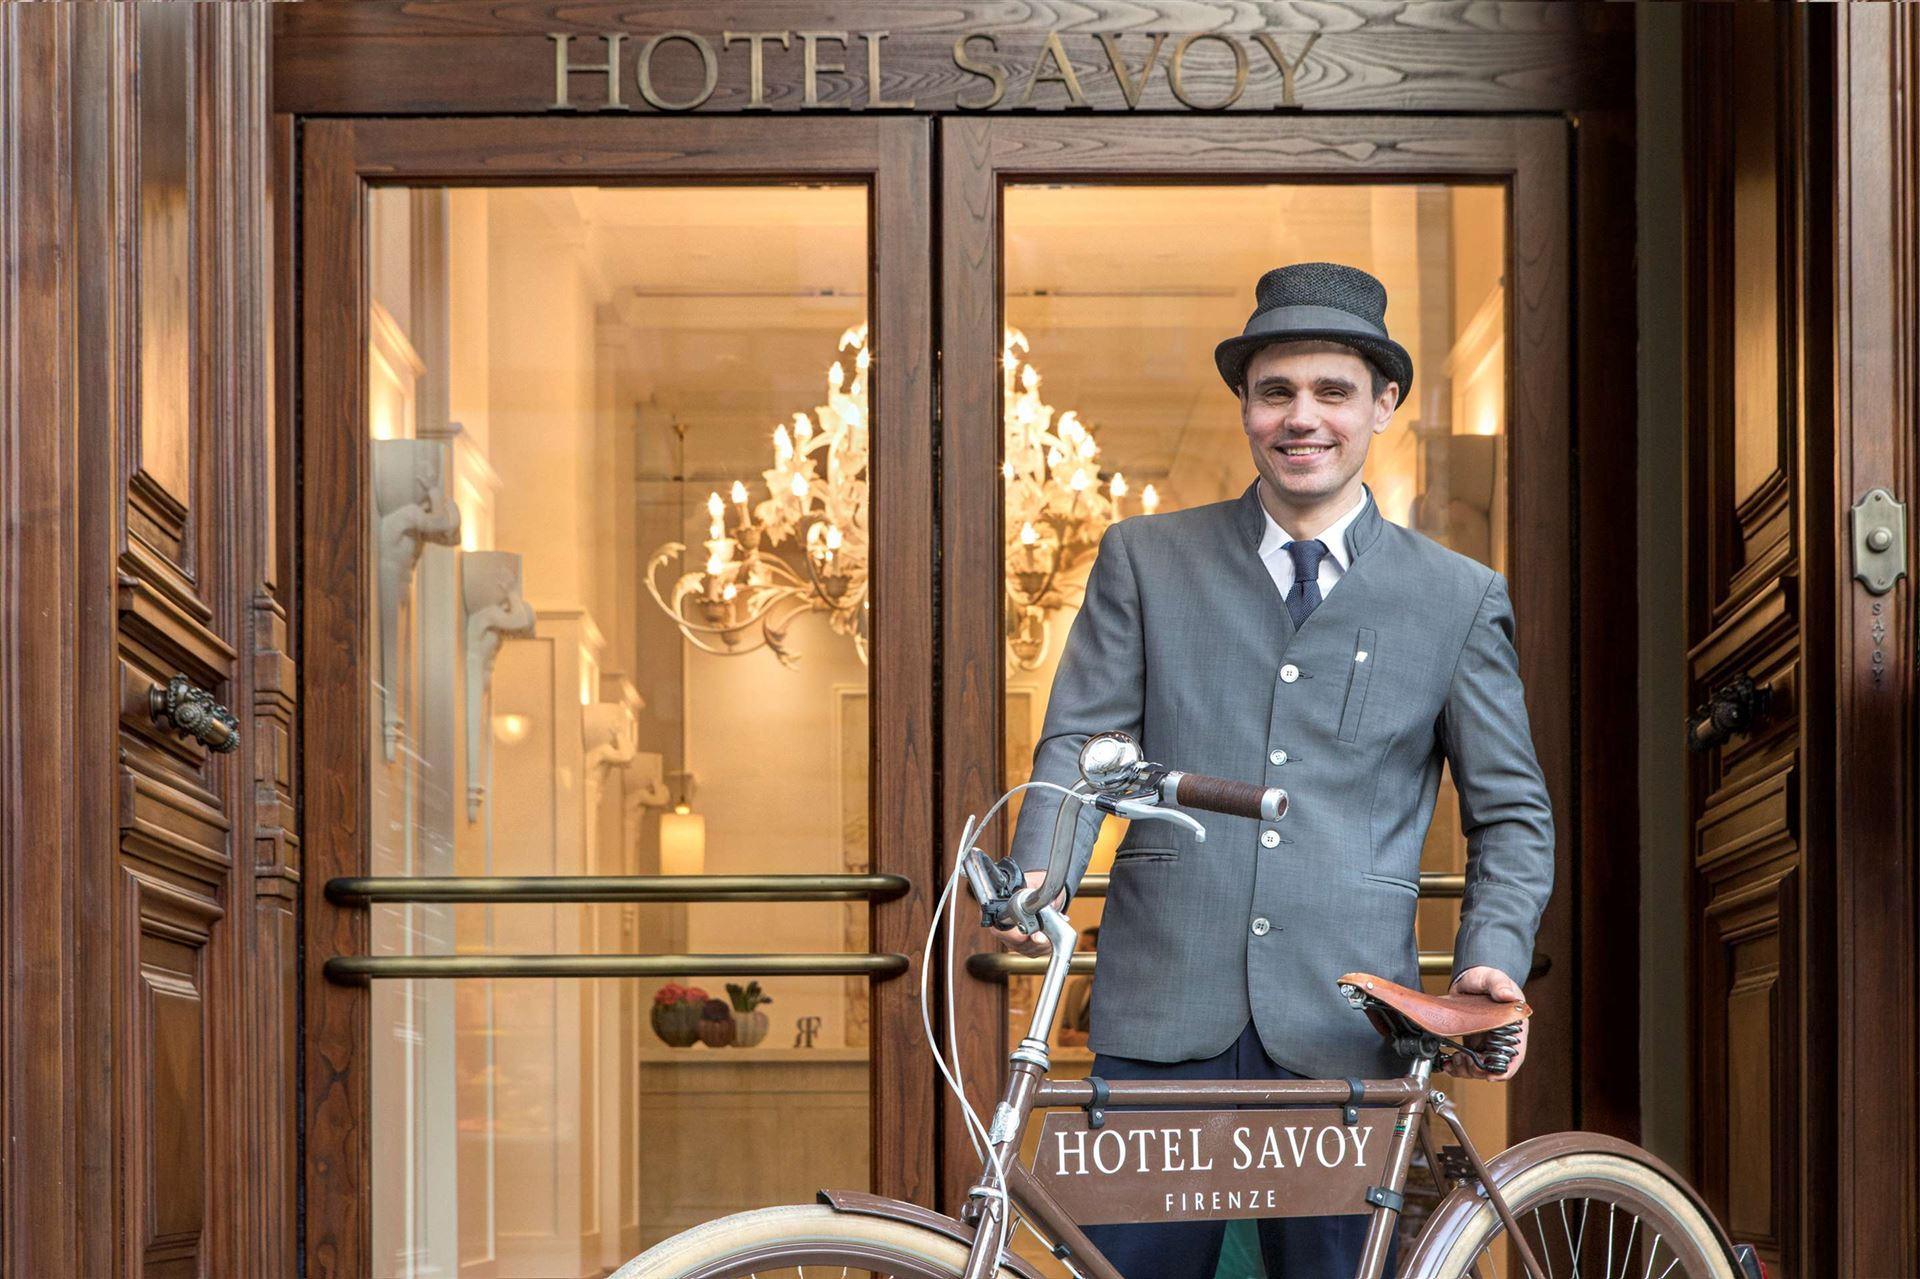 Hotel Savoy Florence, a Rocco Forte hotel luxe hotel deals